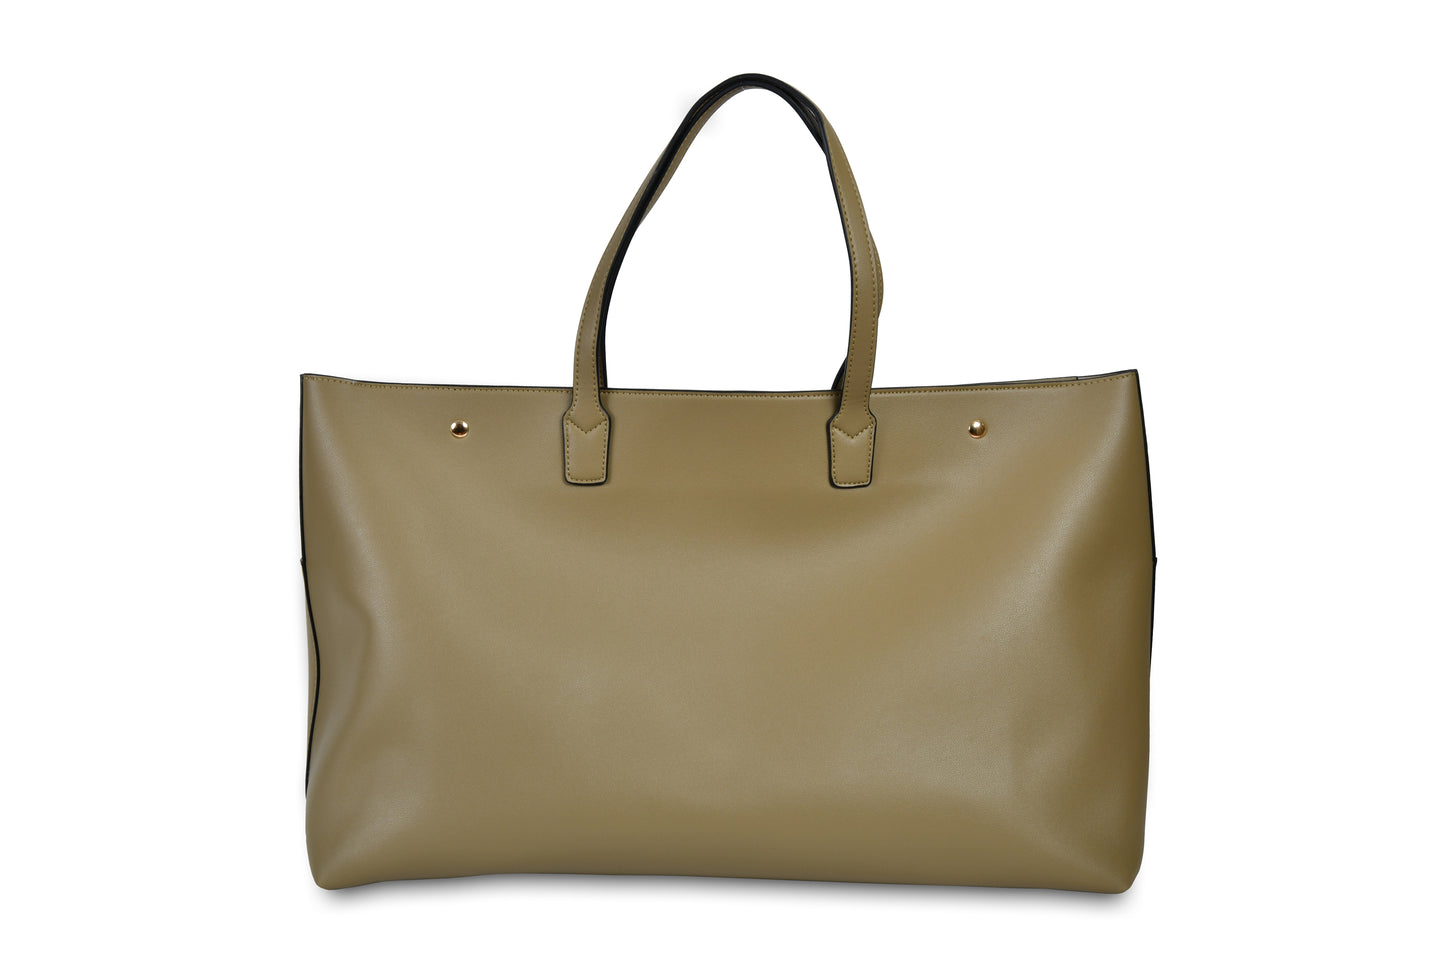 Zuma Pebble Grain Faux Leather Olive Green Big Tote Bag Beach Bag made bye Dewi Maya back view available at the best boutique in Upstate South Carolina Spartanburg Greenville Dewi Maya Boutique